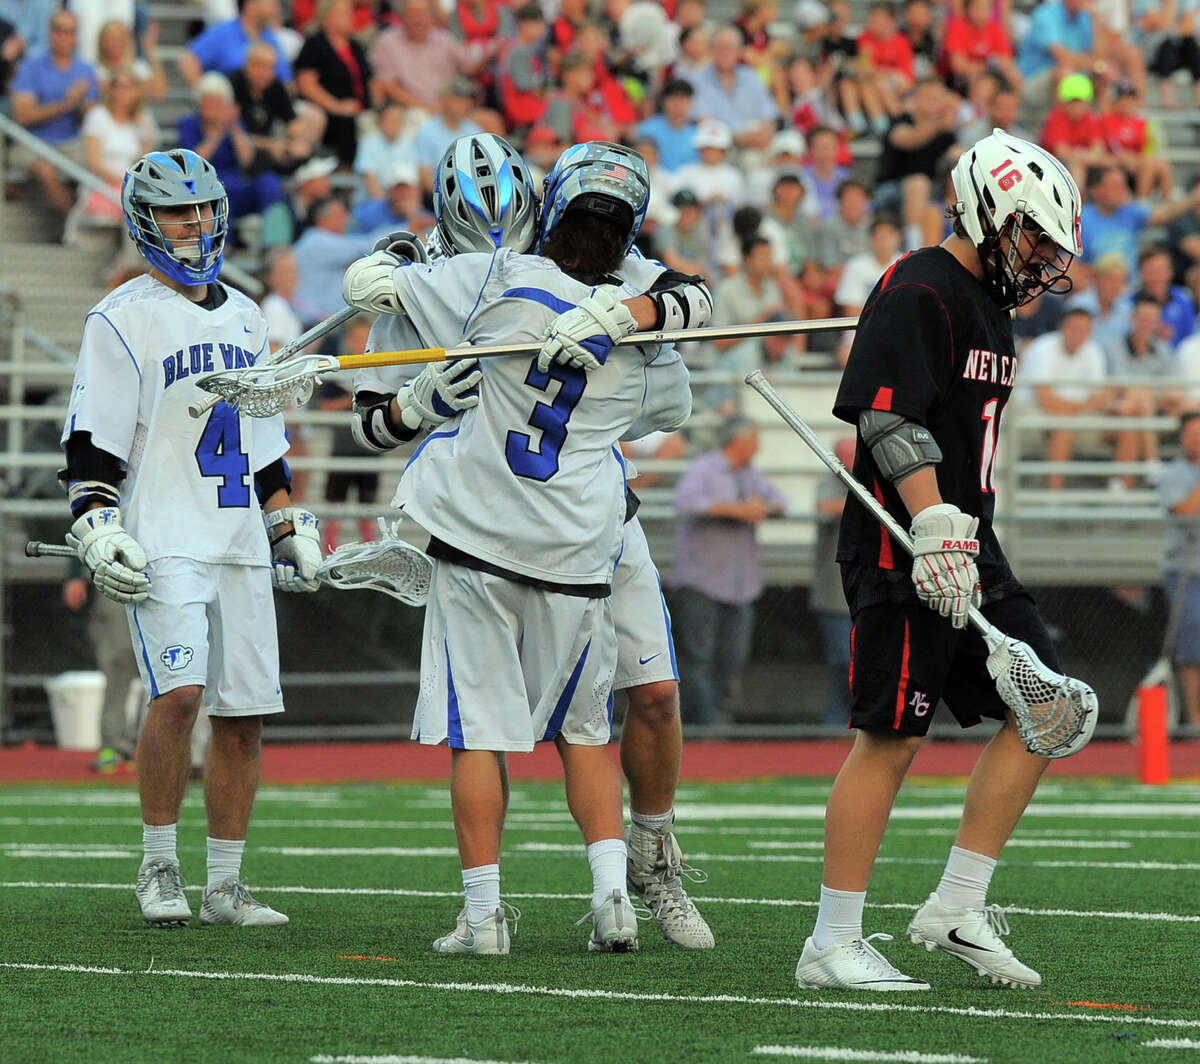 Darien Colin Minicus (3) celebrates a first half goal against New Canaan in a FCIAC Boys Lacrosse Final at Brien McMahon High School in Norwalk, Conn. on May 26, 2016.